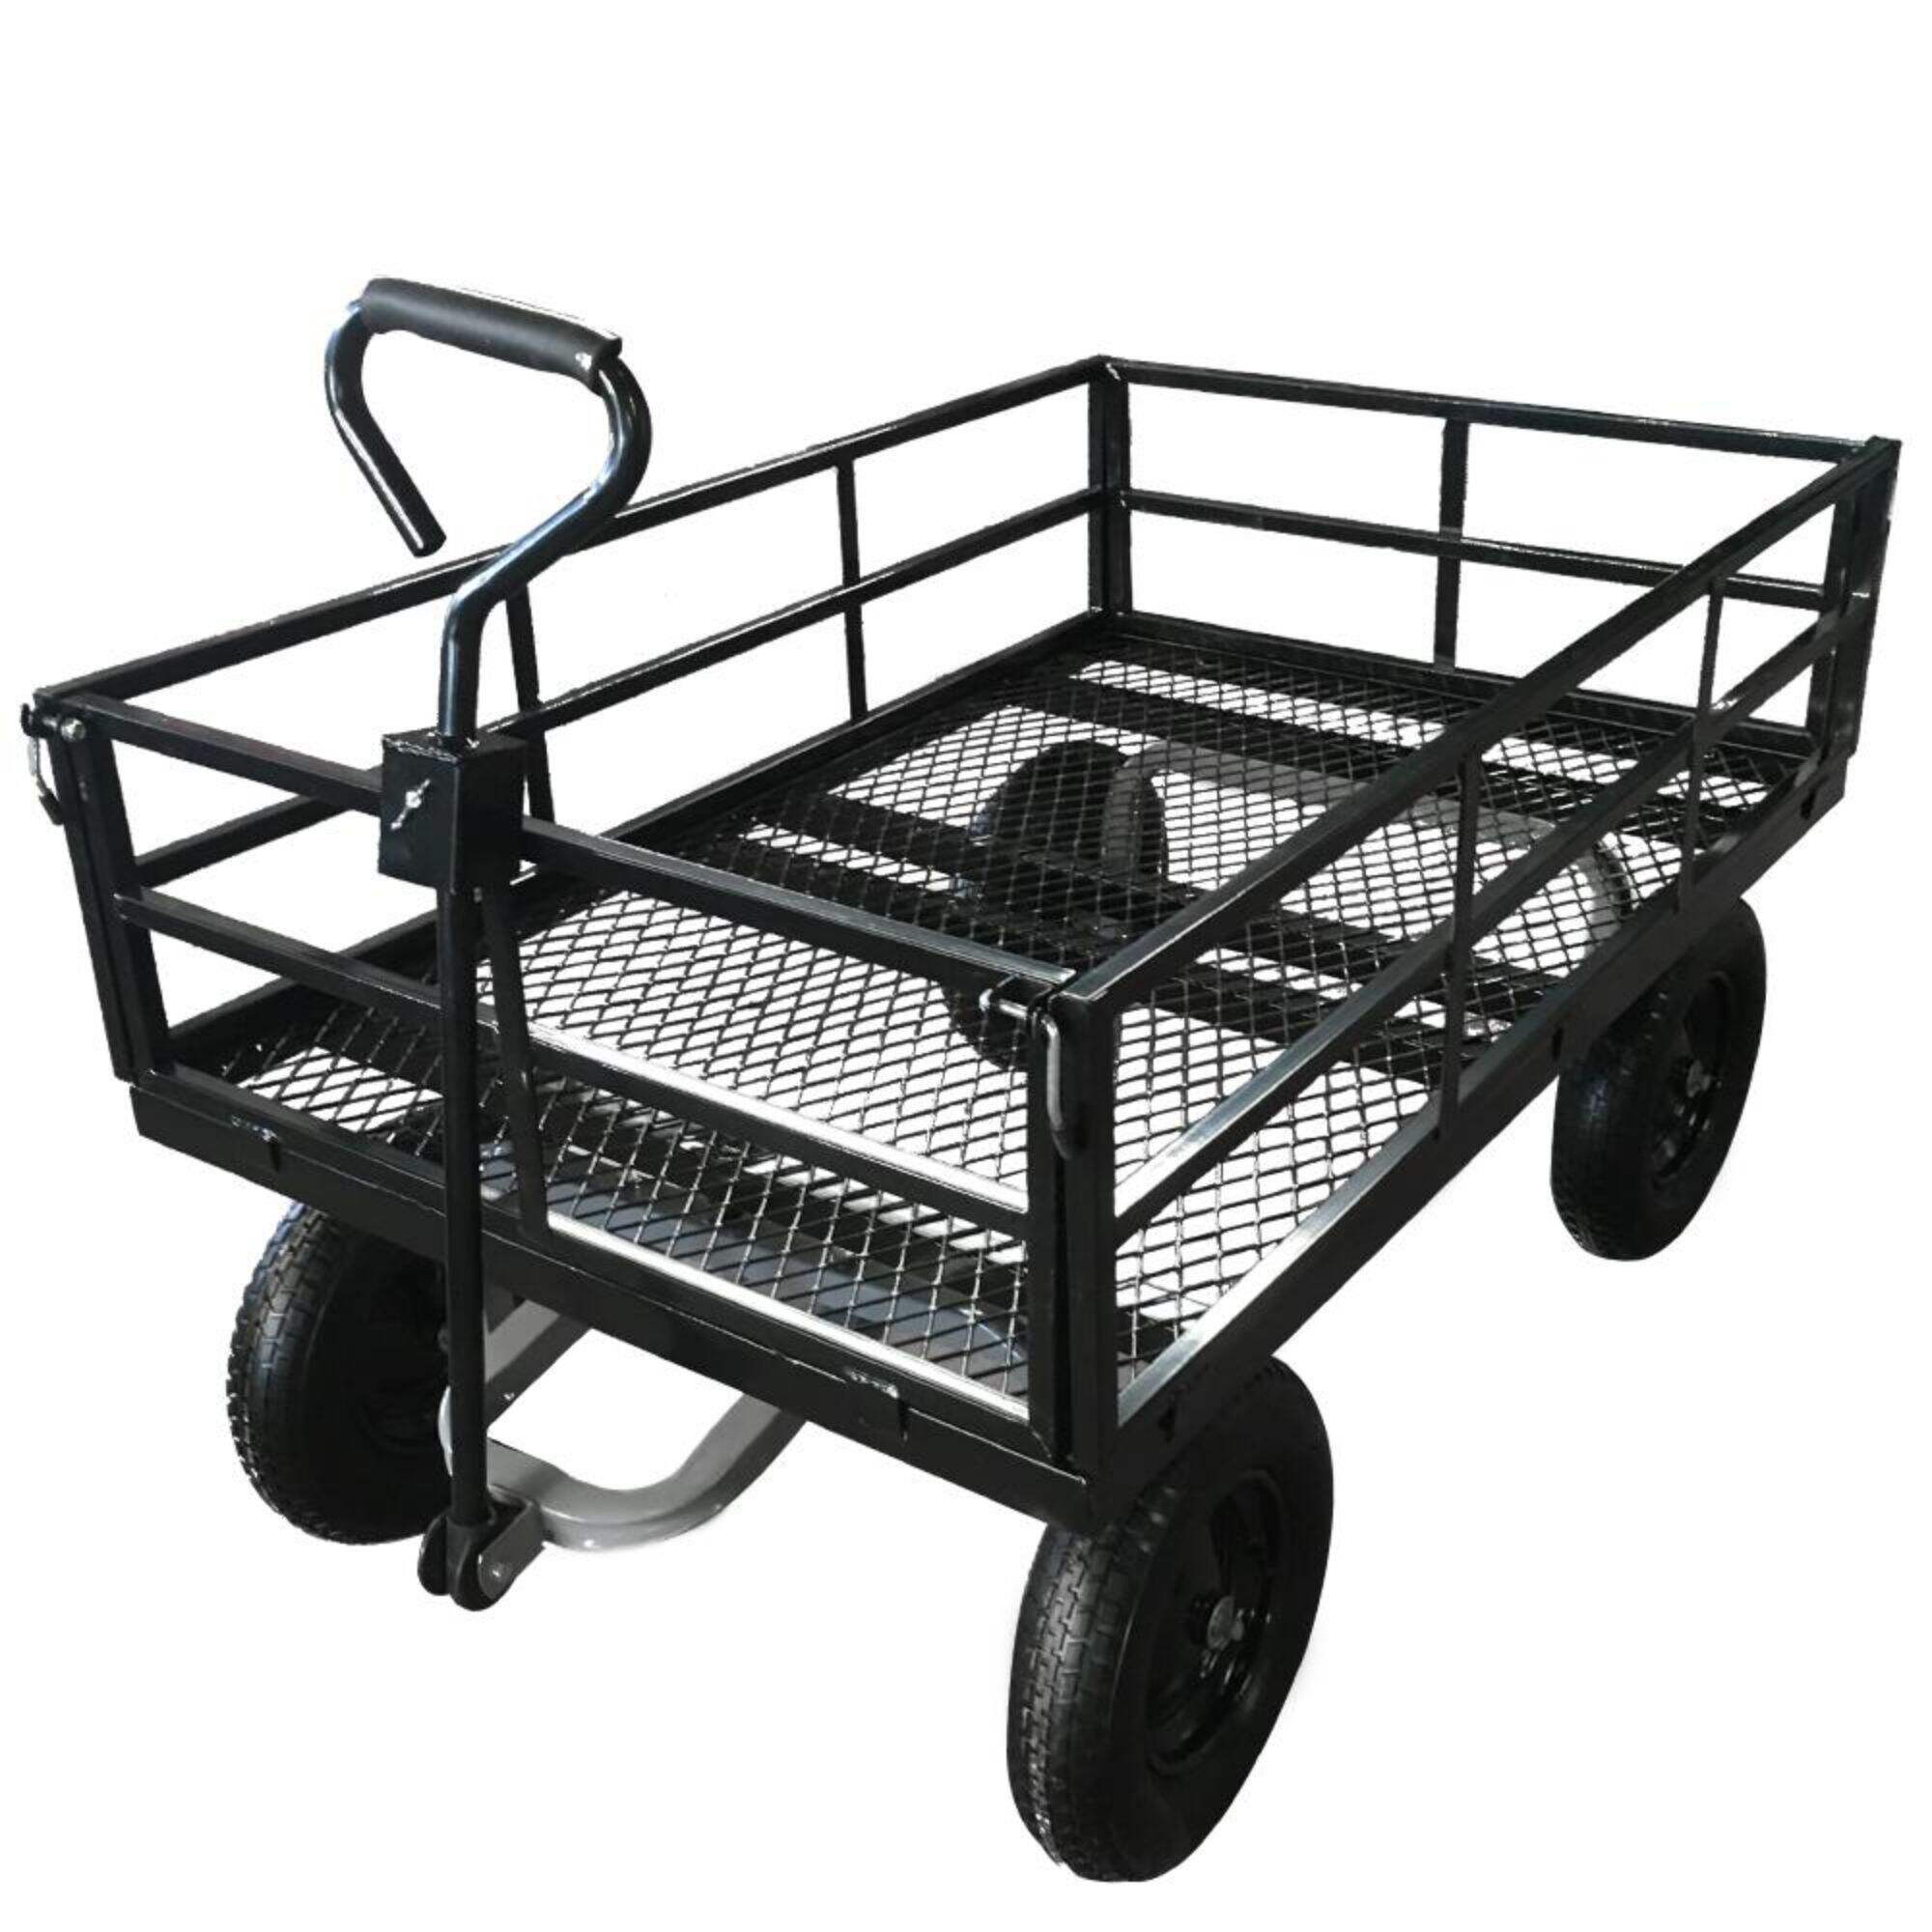 TC4206 Mesh Steel Garden Cart, Folding Utility Trolley Wagon, with Removable Sides, 16